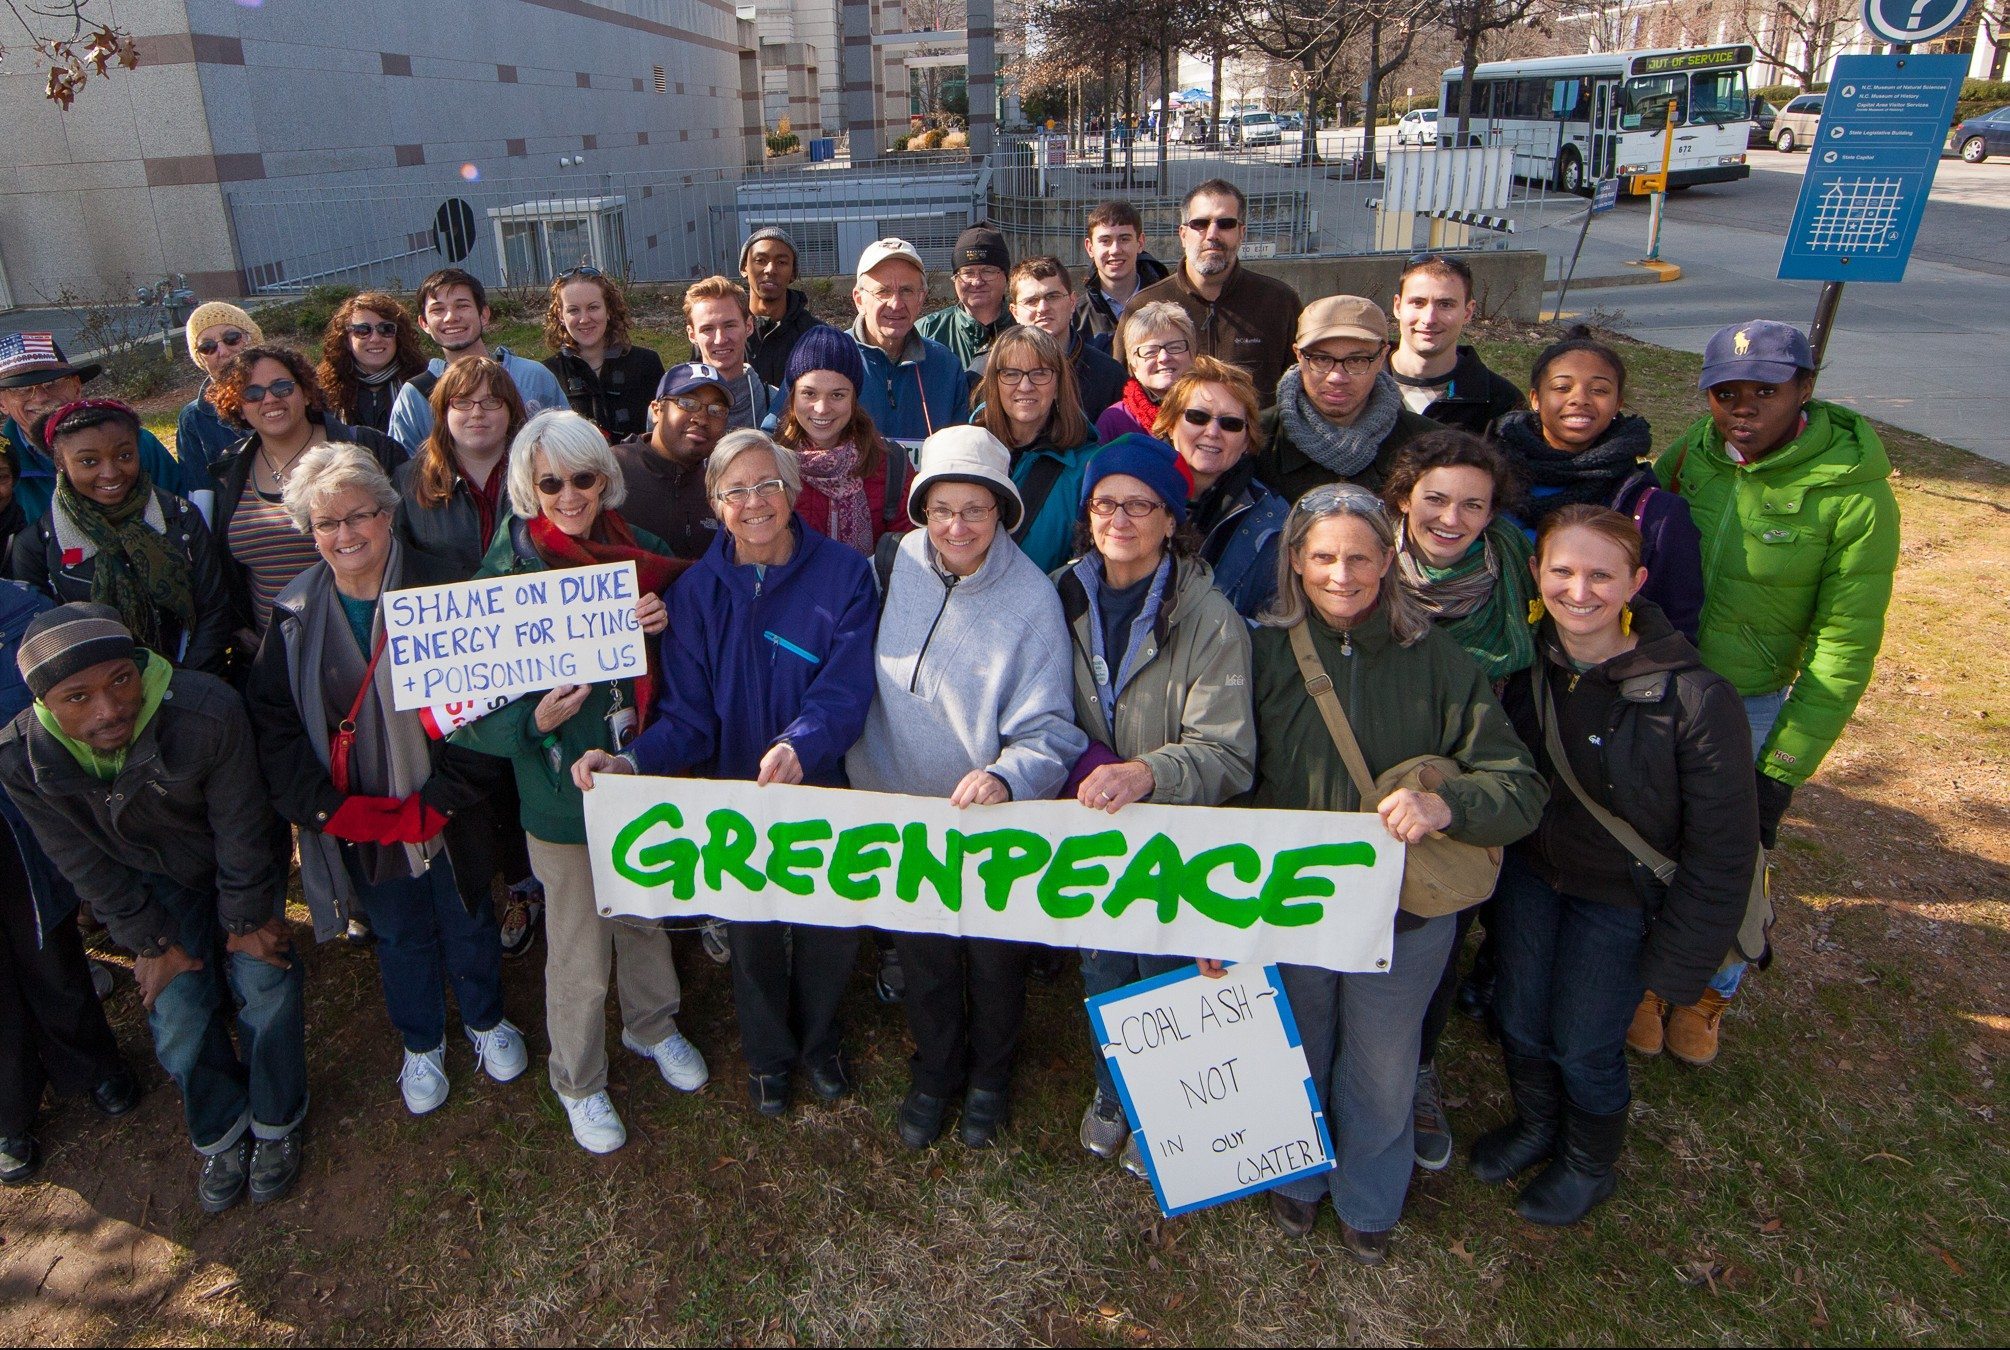 Moral Monday Protest in Raleigh - Greenpeace USA